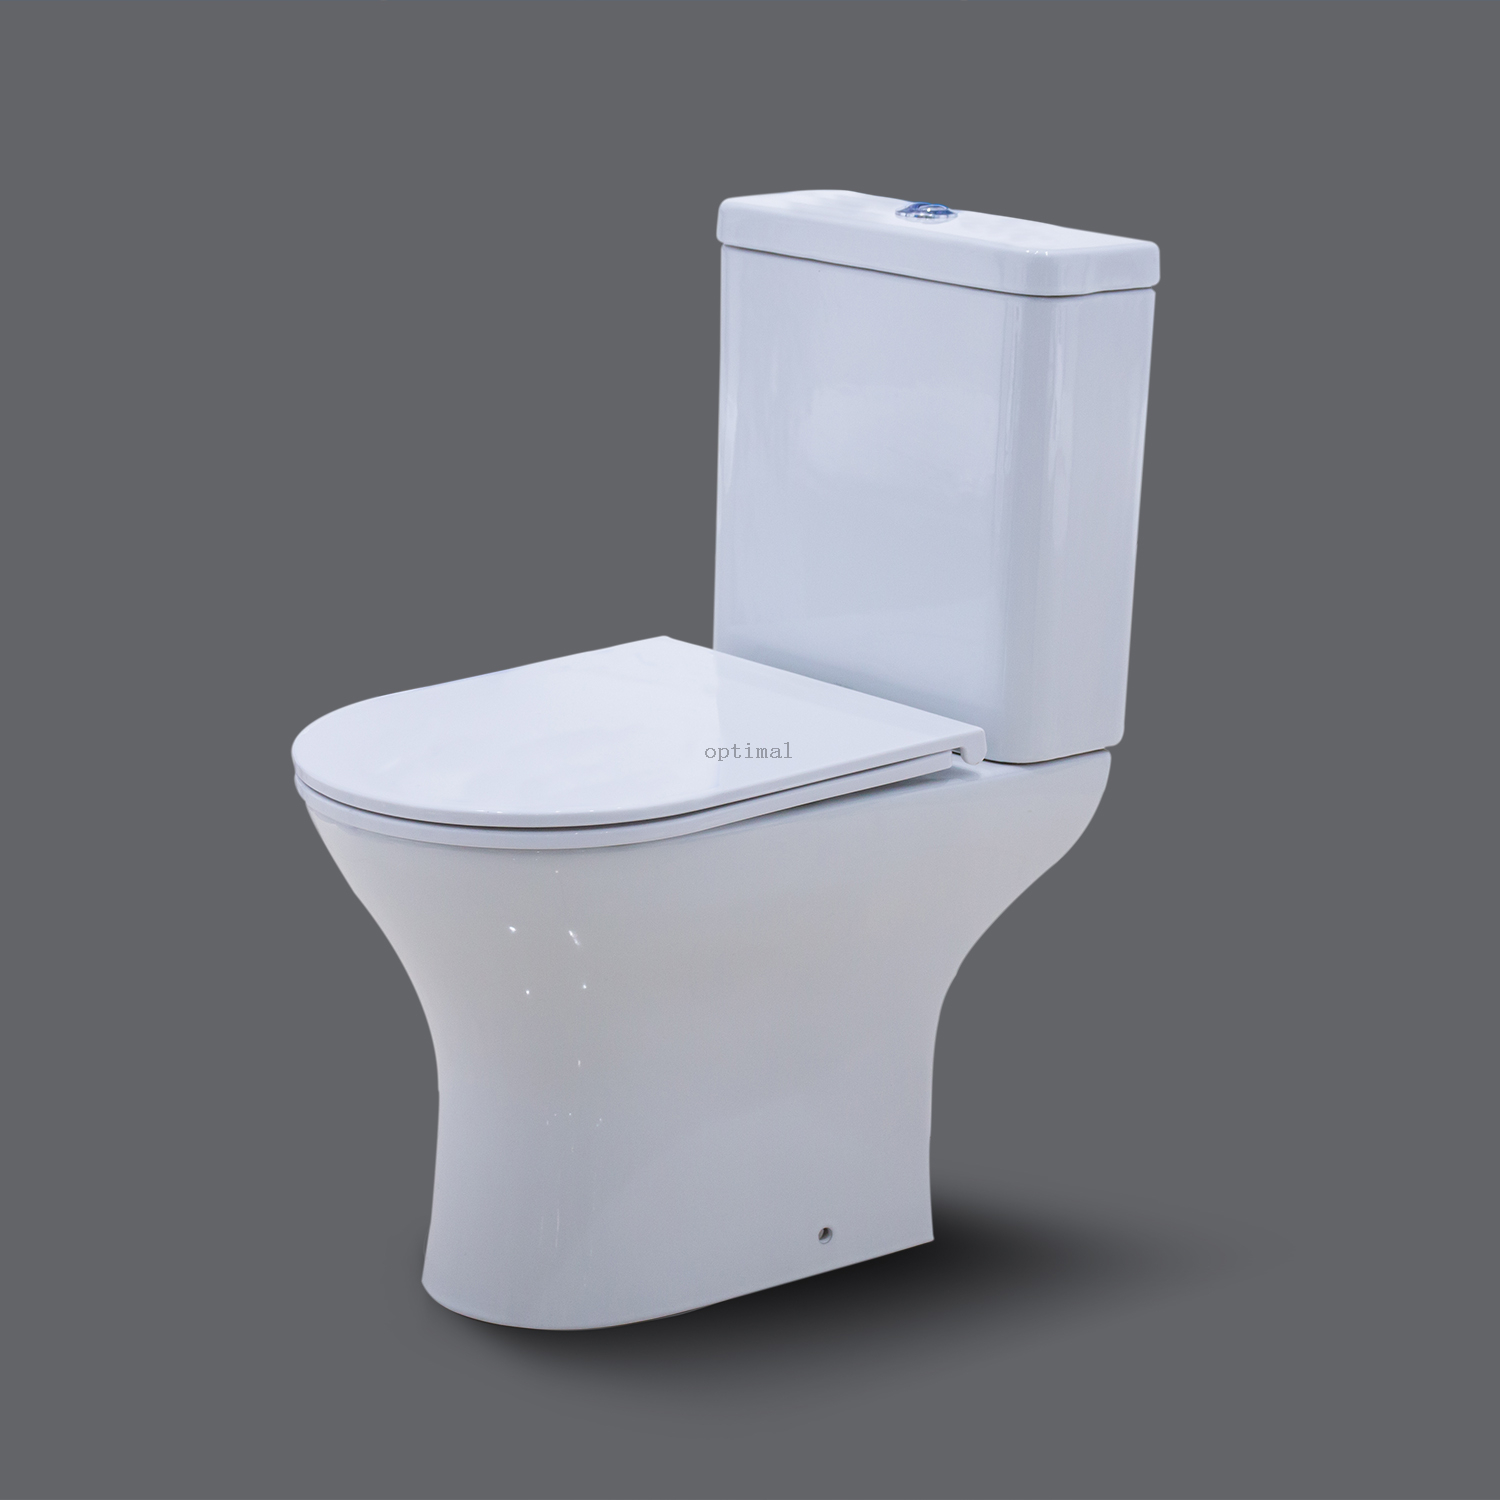 European Bathroom Sanitaryware Standard Hight Quality Two-piece P-trap 180mm Toilet Wc with UF Seat Cover